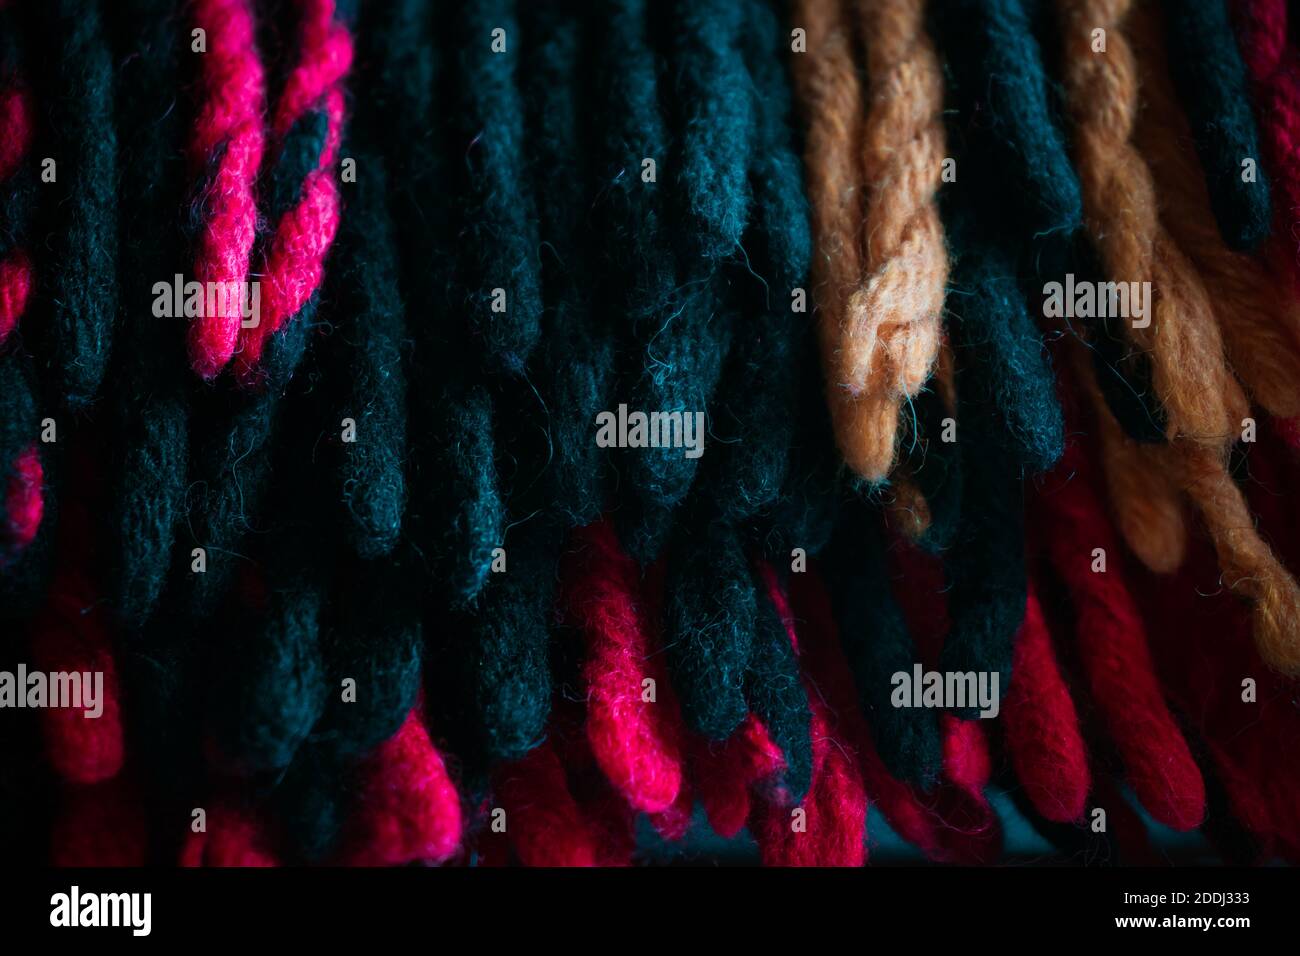 Cold season home warmth and cosiness. Woolen braided thick threads tassels of a warm traditional plaid, group of many hanging knitted red, yellow and Stock Photo